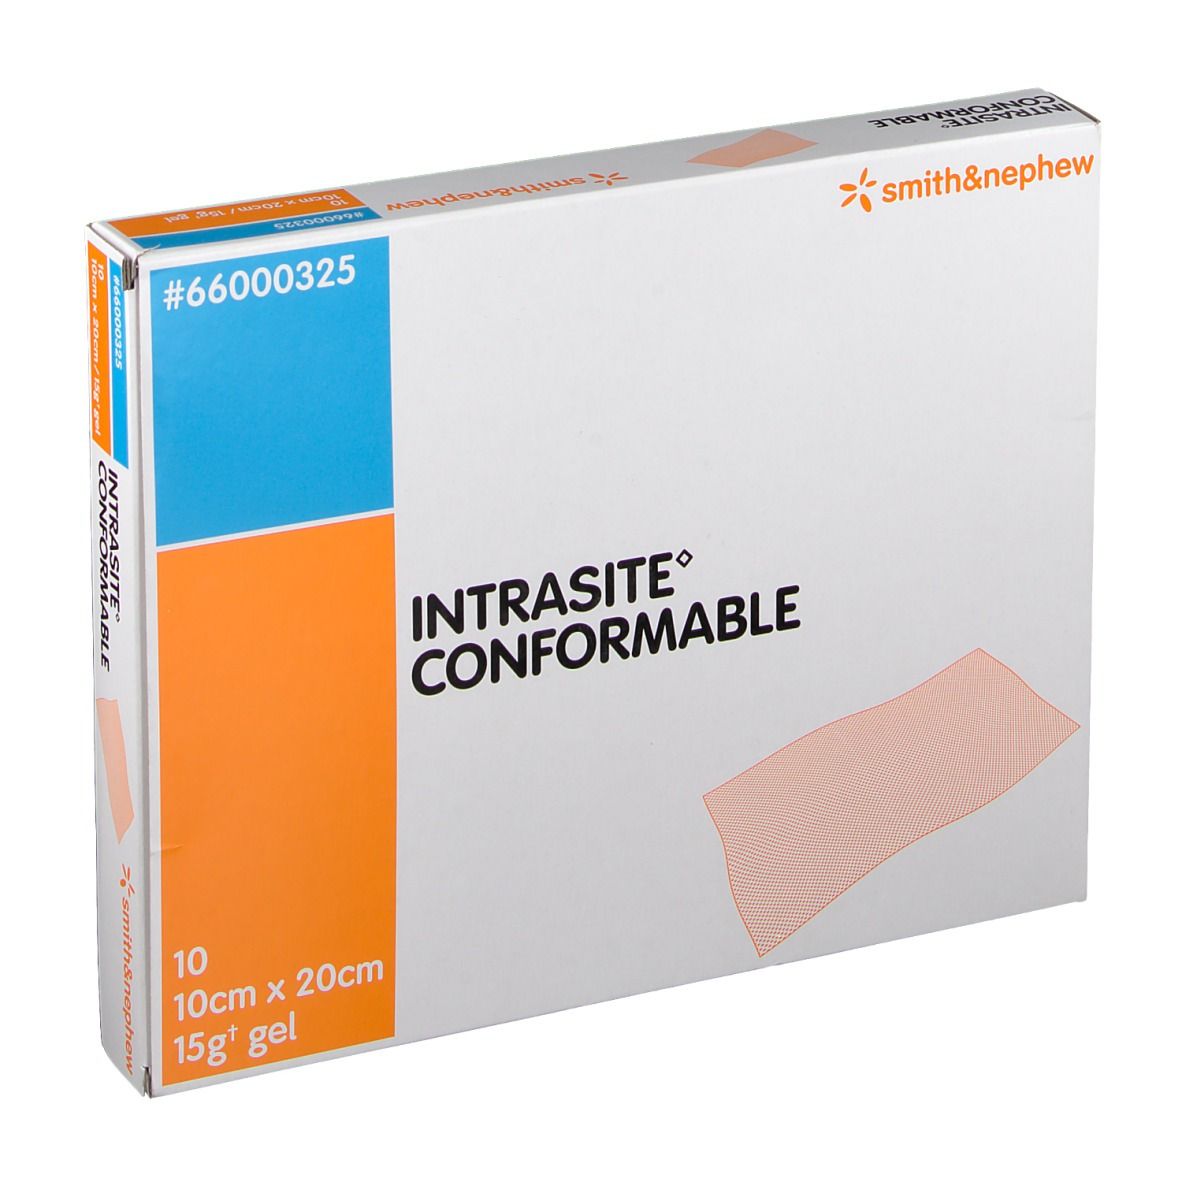 Image of INTRASITE Conformable Hydrogel Wundverband 10 cm x 20 cm